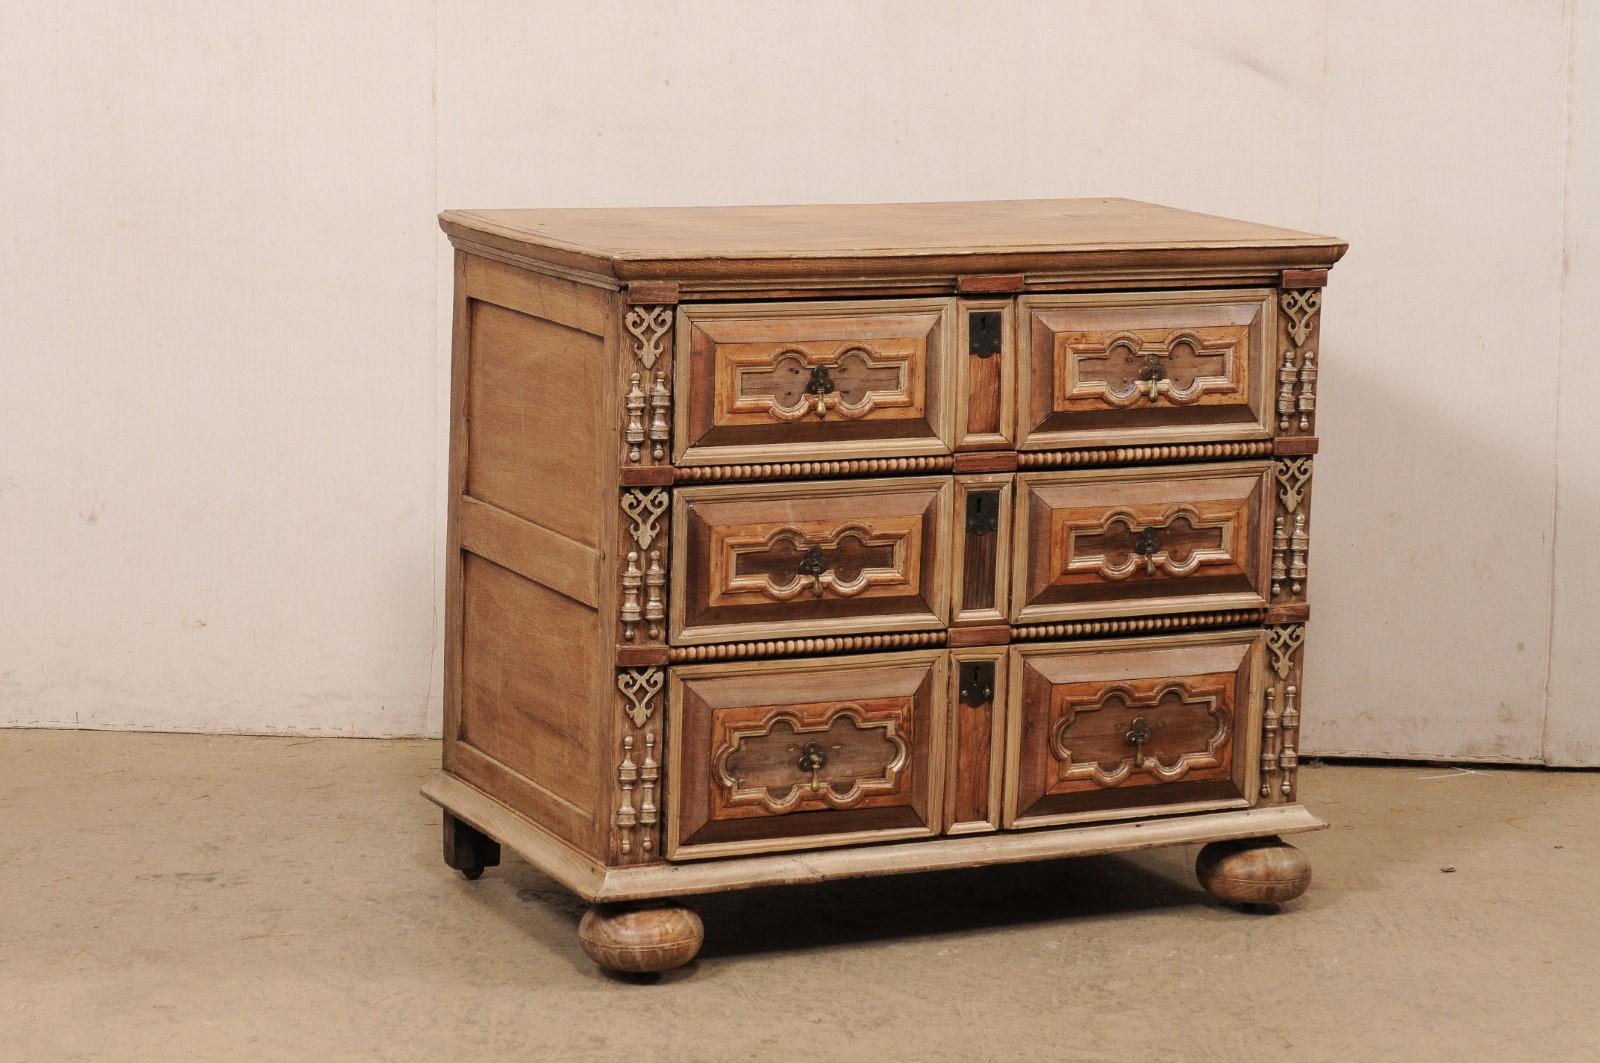 Antique English Highly-Decorated Carved-Wood Chest of Drawers In Good Condition For Sale In Atlanta, GA